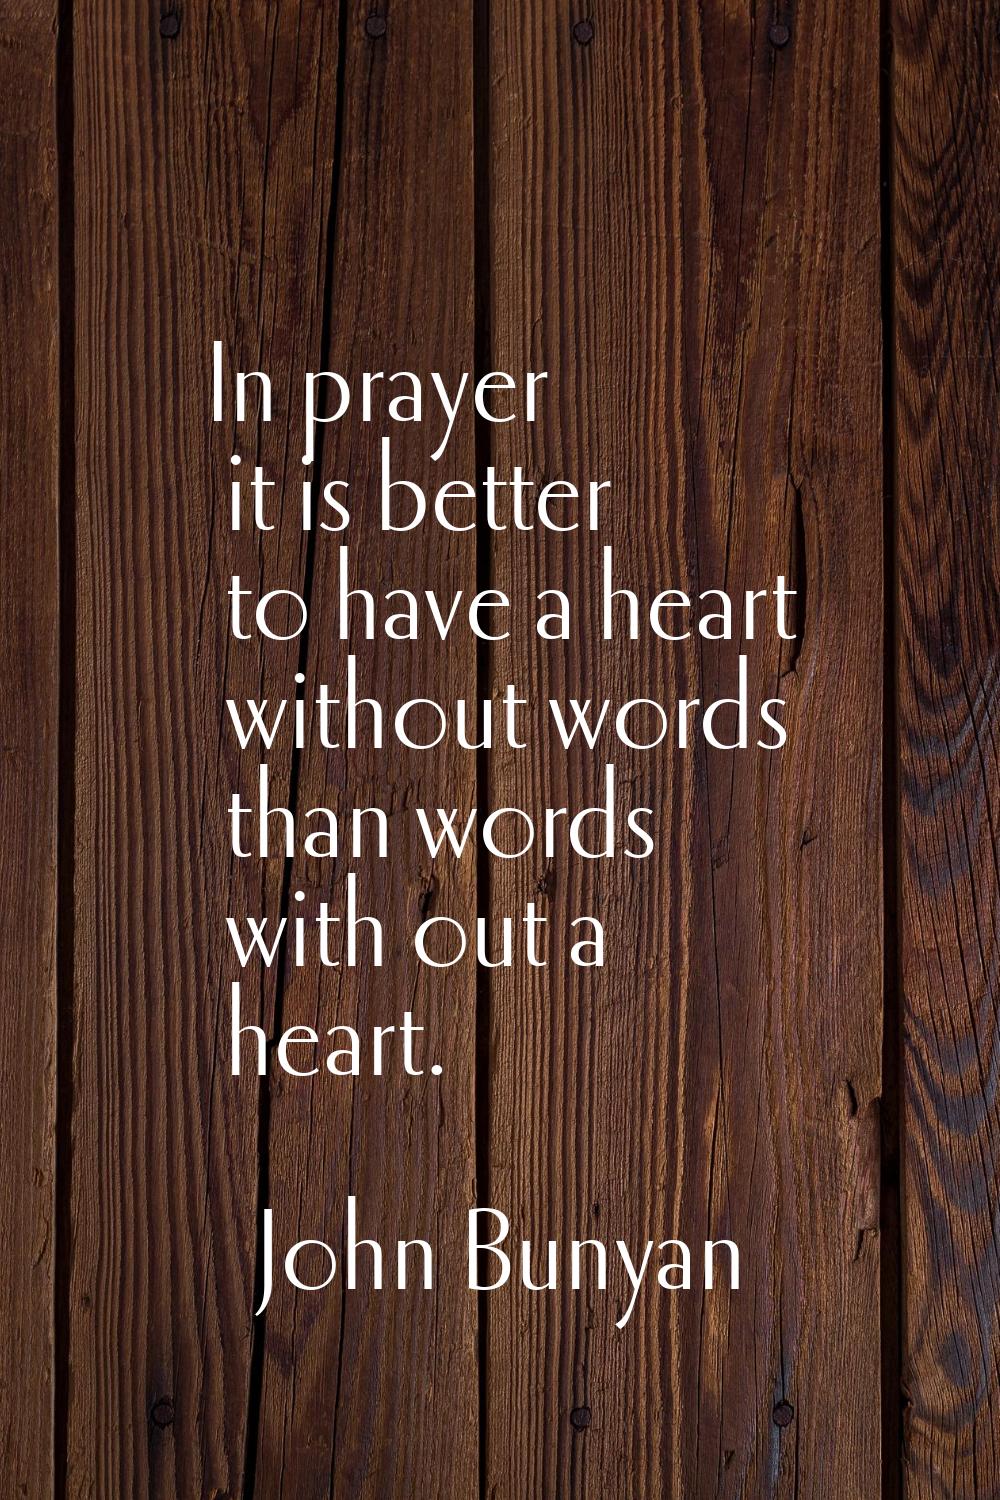 In prayer it is better to have a heart without words than words with out a heart.